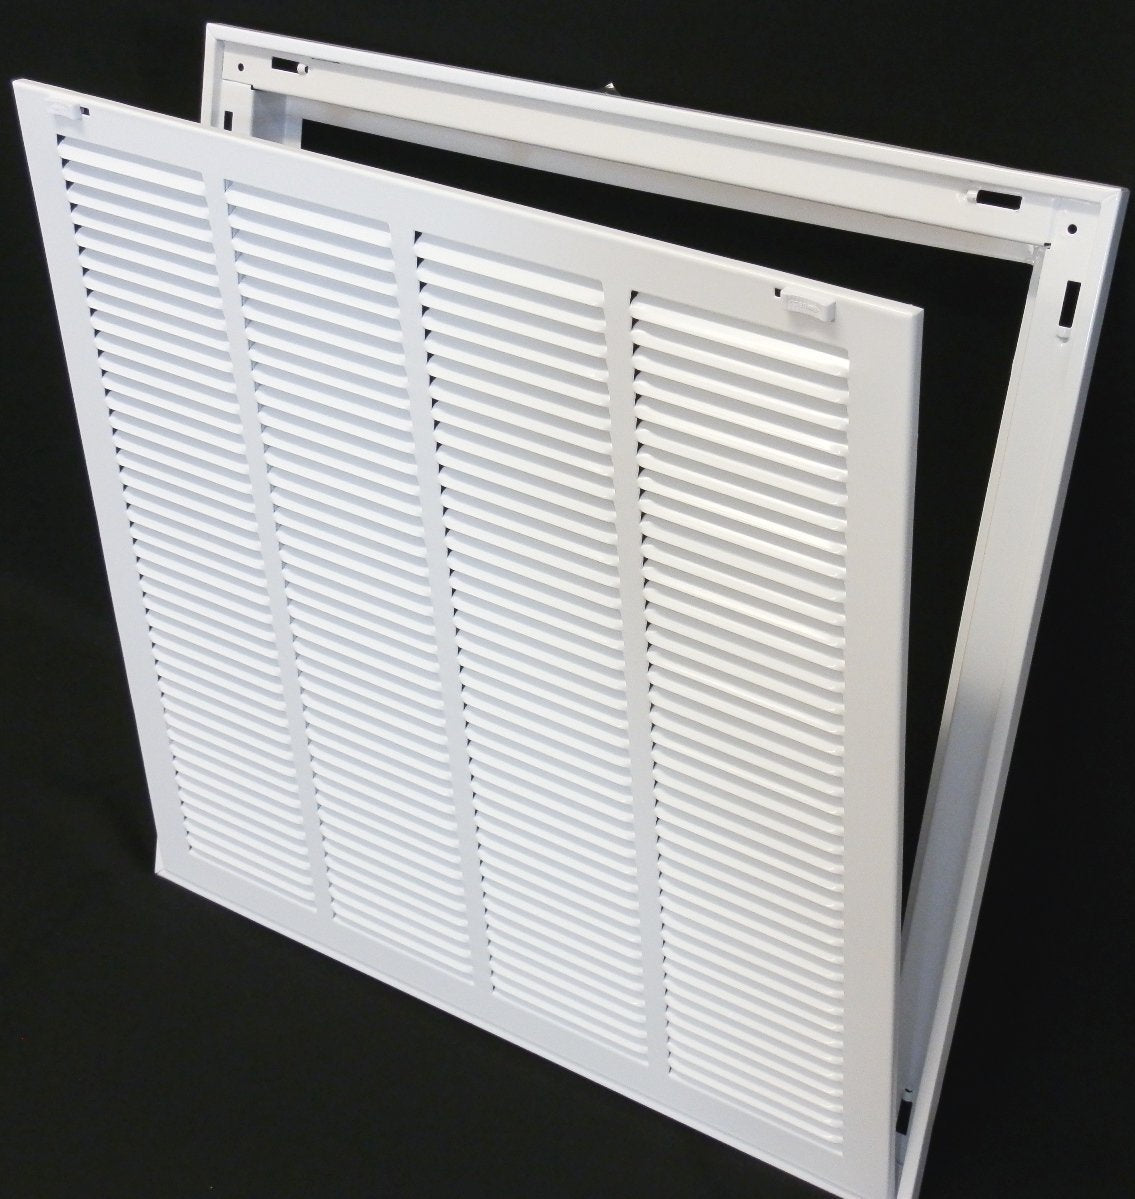 8&quot; X 24&quot; Steel Return Air Filter Grille for 1&quot; Filter - Removable Frame - [Outer Dimensions: 10 5/8&quot; X 26 5/8&quot;]